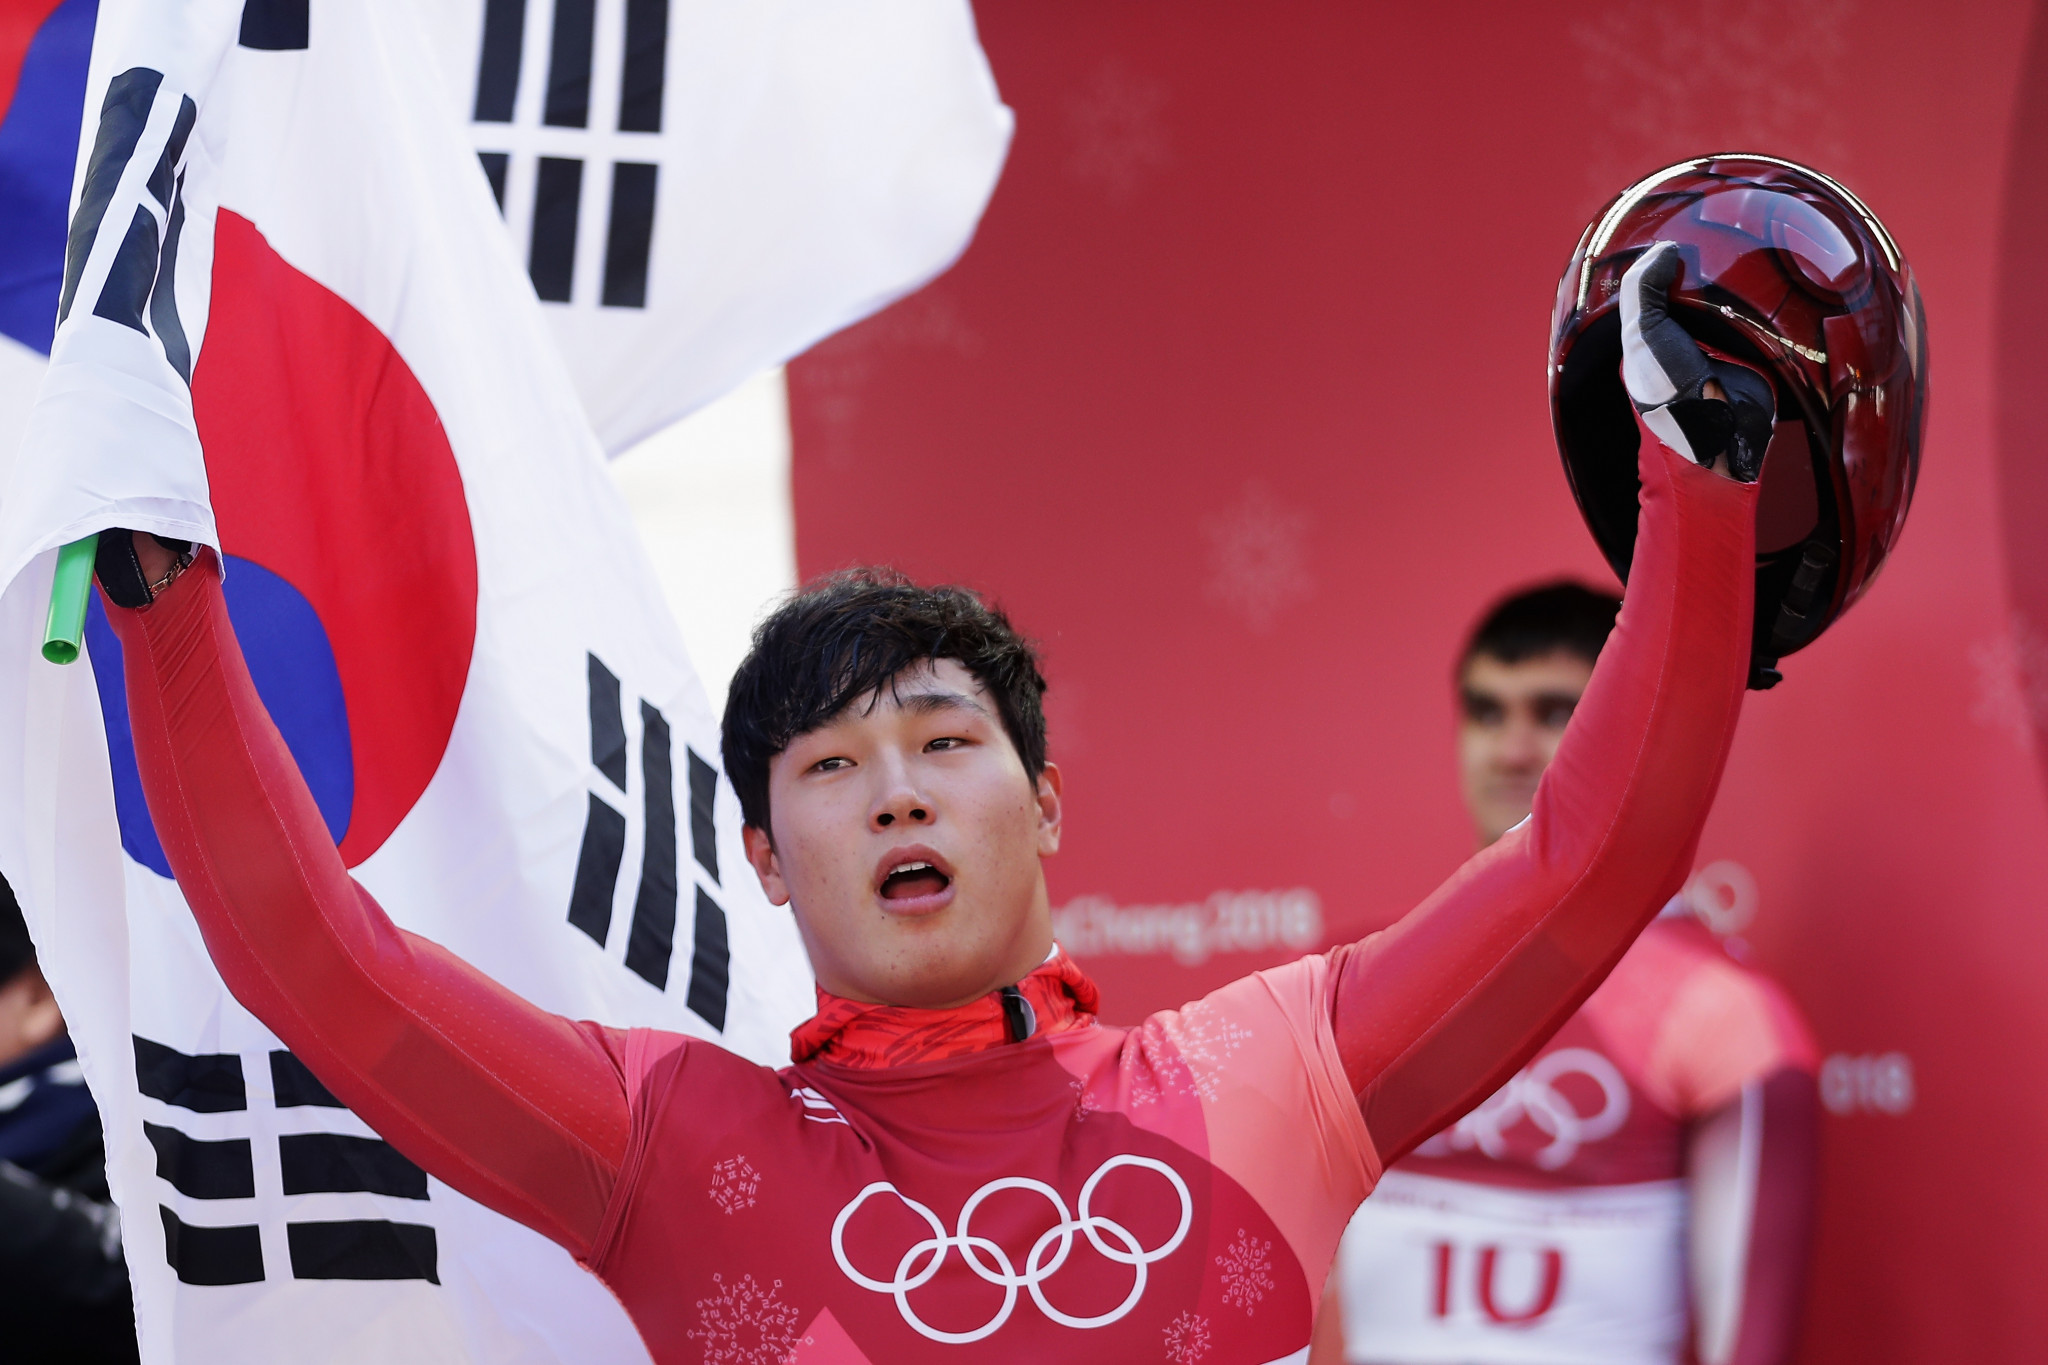 Yun secures hosts South Korea's second gold medal of Pyeongchang 2018 with men's skeleton triumph